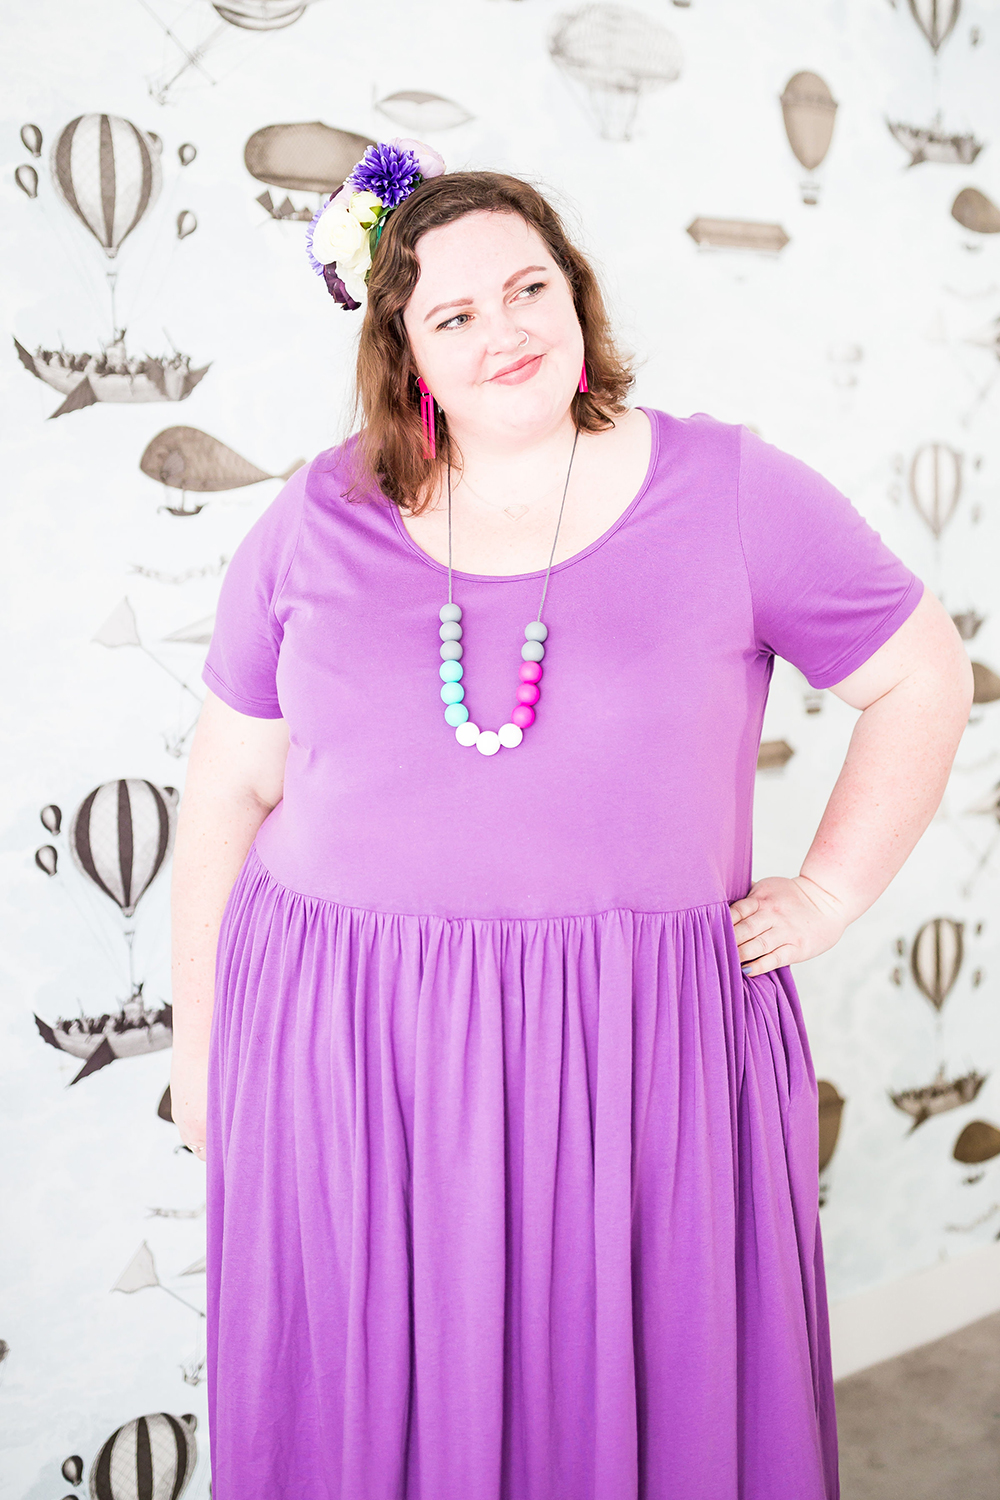 Plus size model Laura wears the House of Boom Demelza Dress in lilac